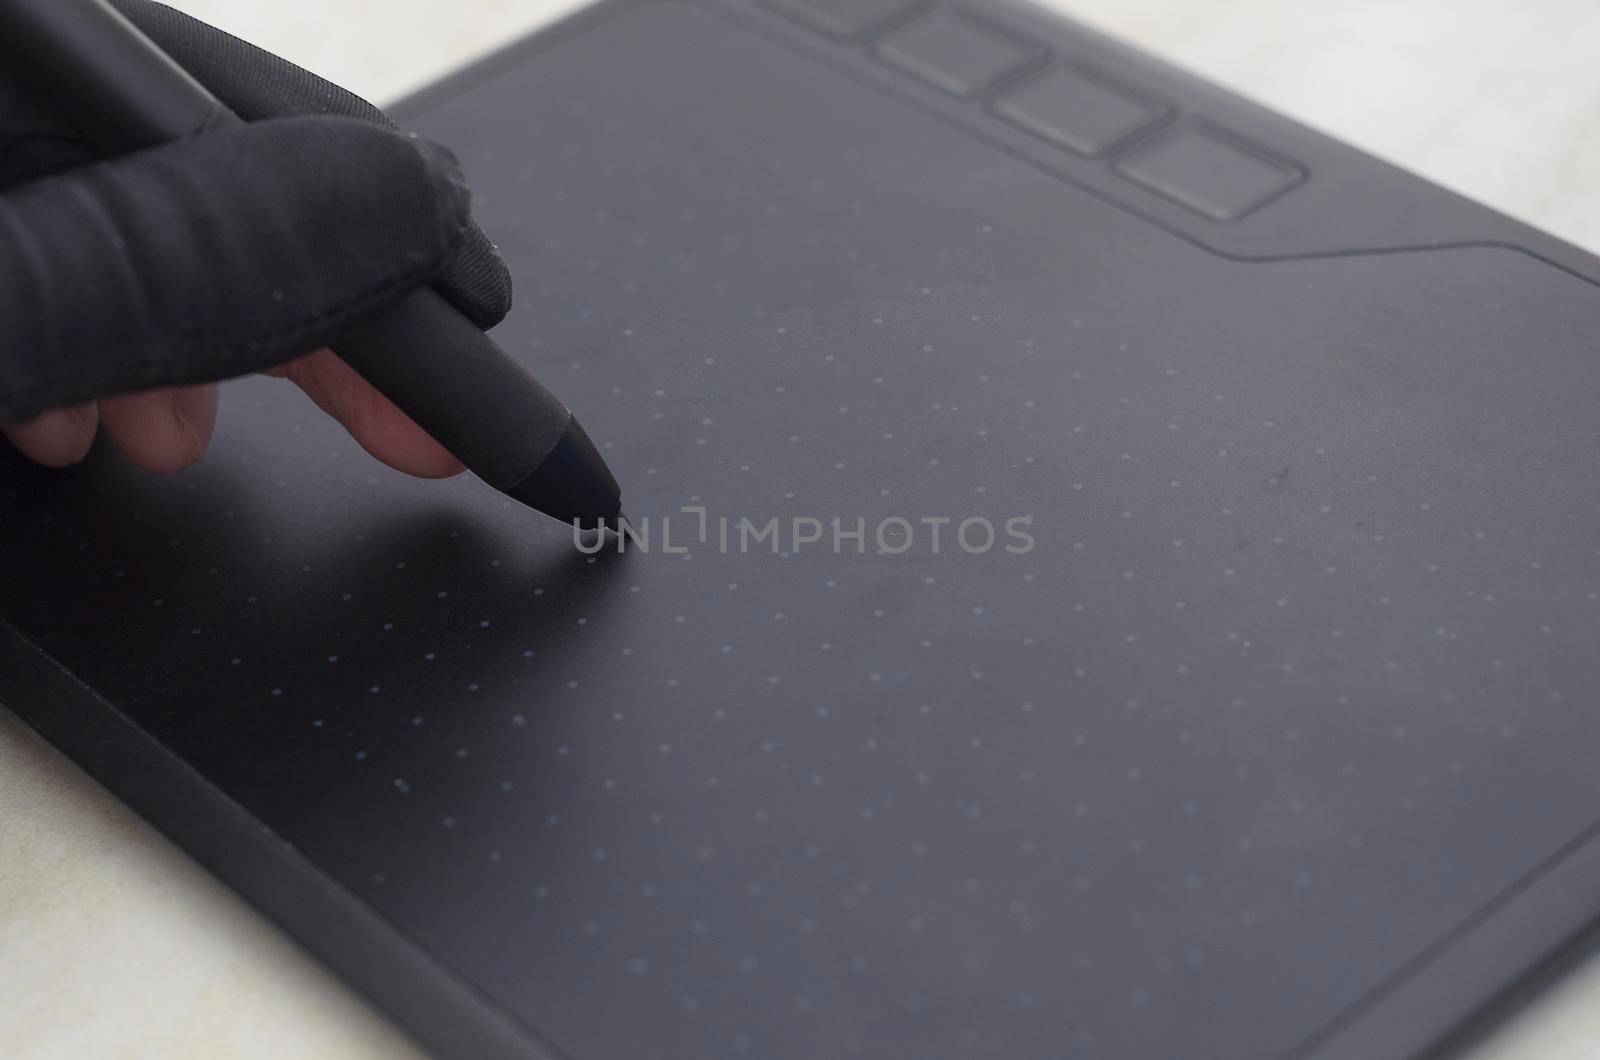 Graphic designer's hand in a black glove draws on the workspace of a graphics tablet,close up.